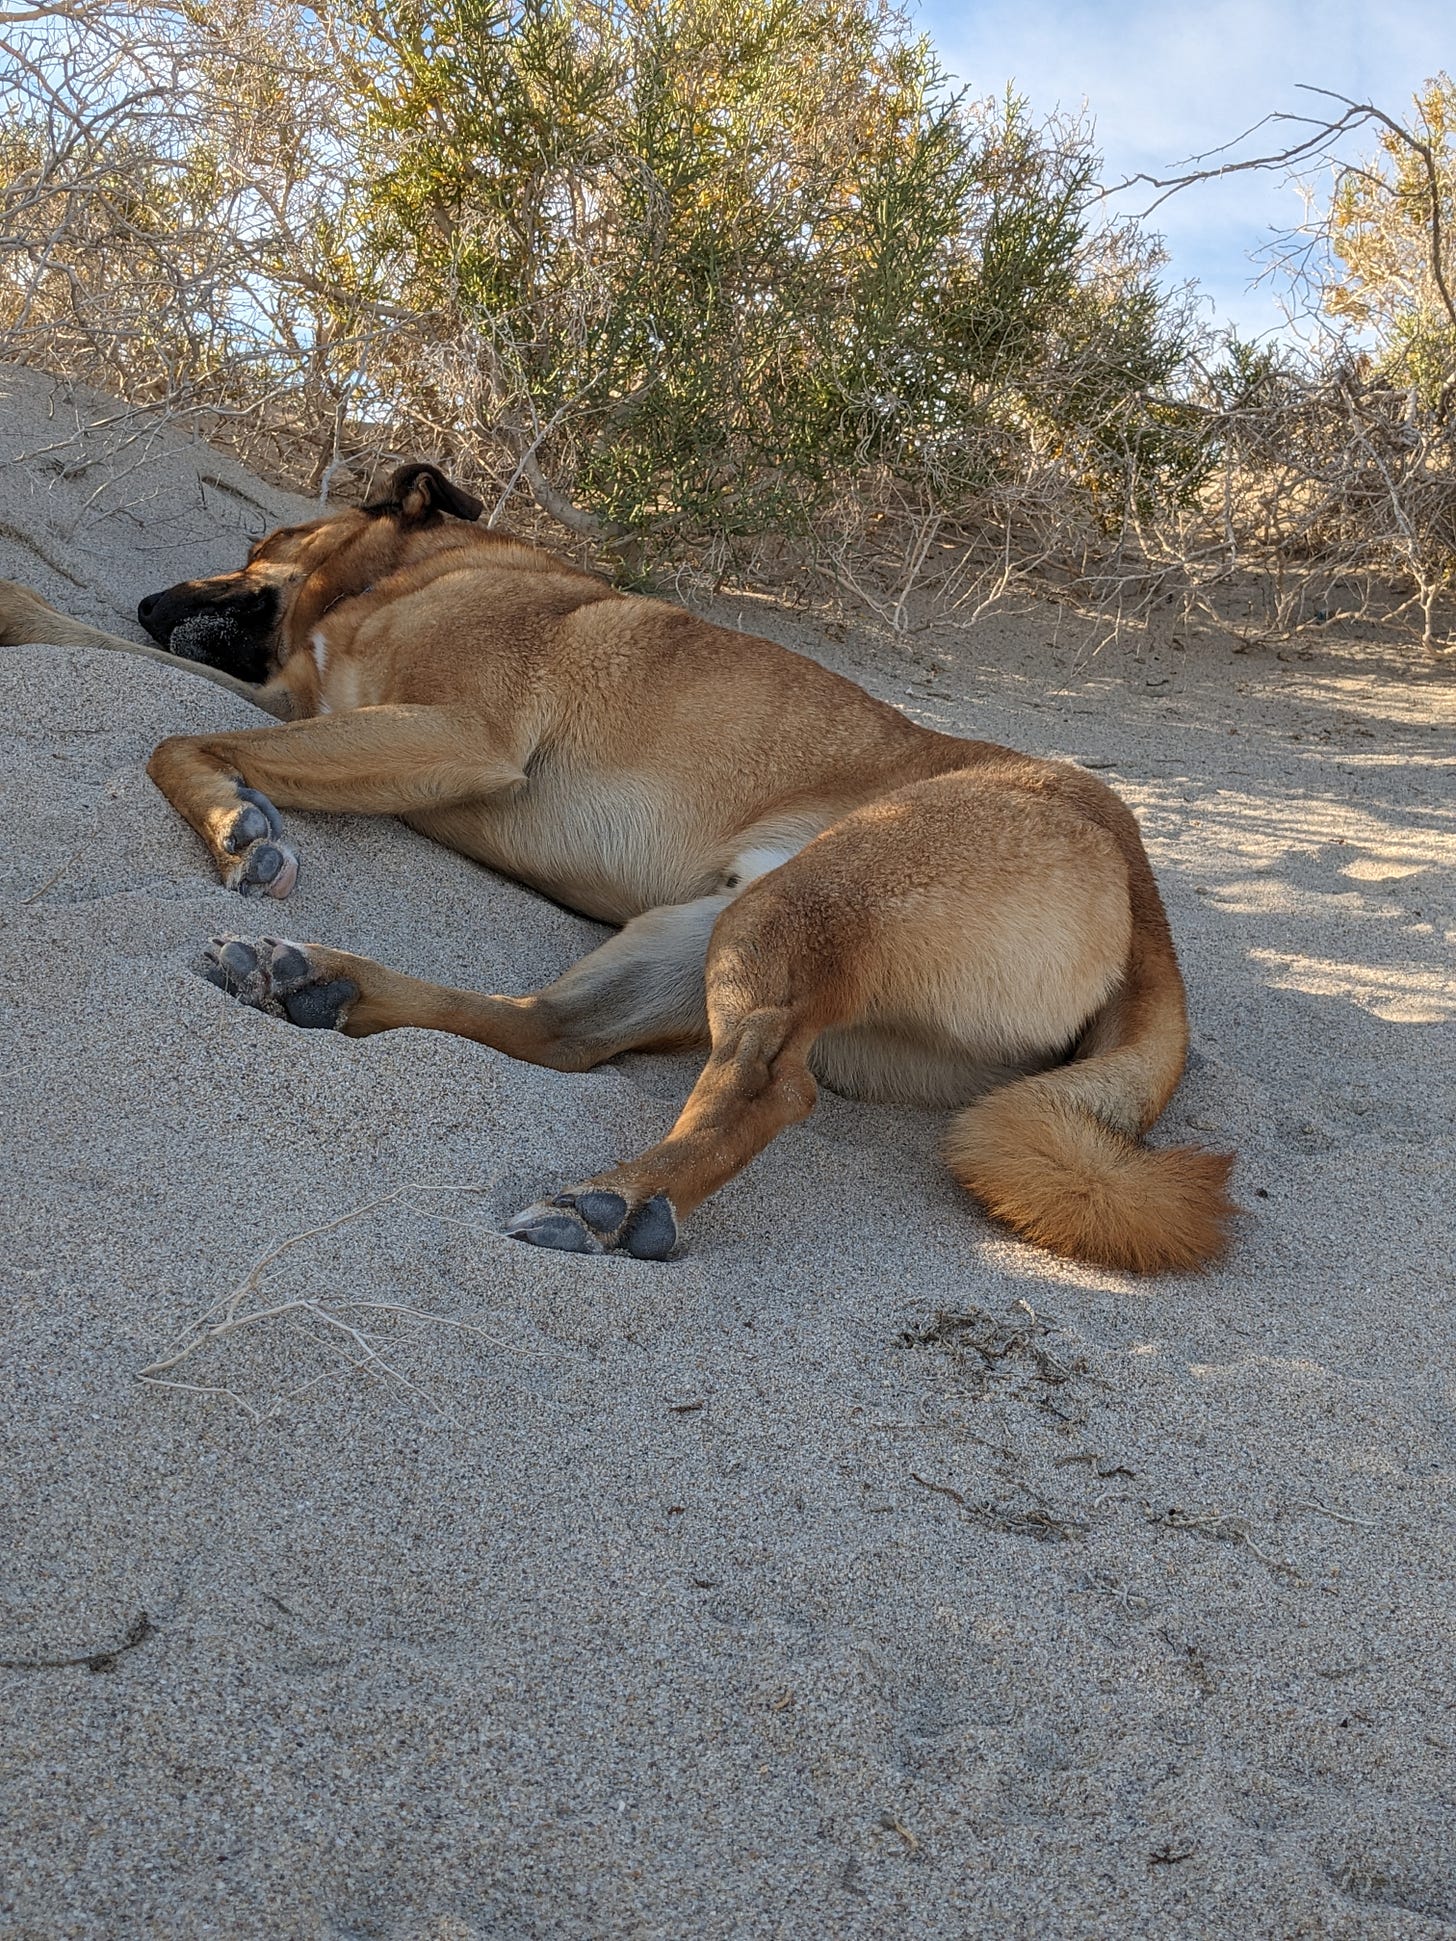 Dog sleeping on the sand in some shade